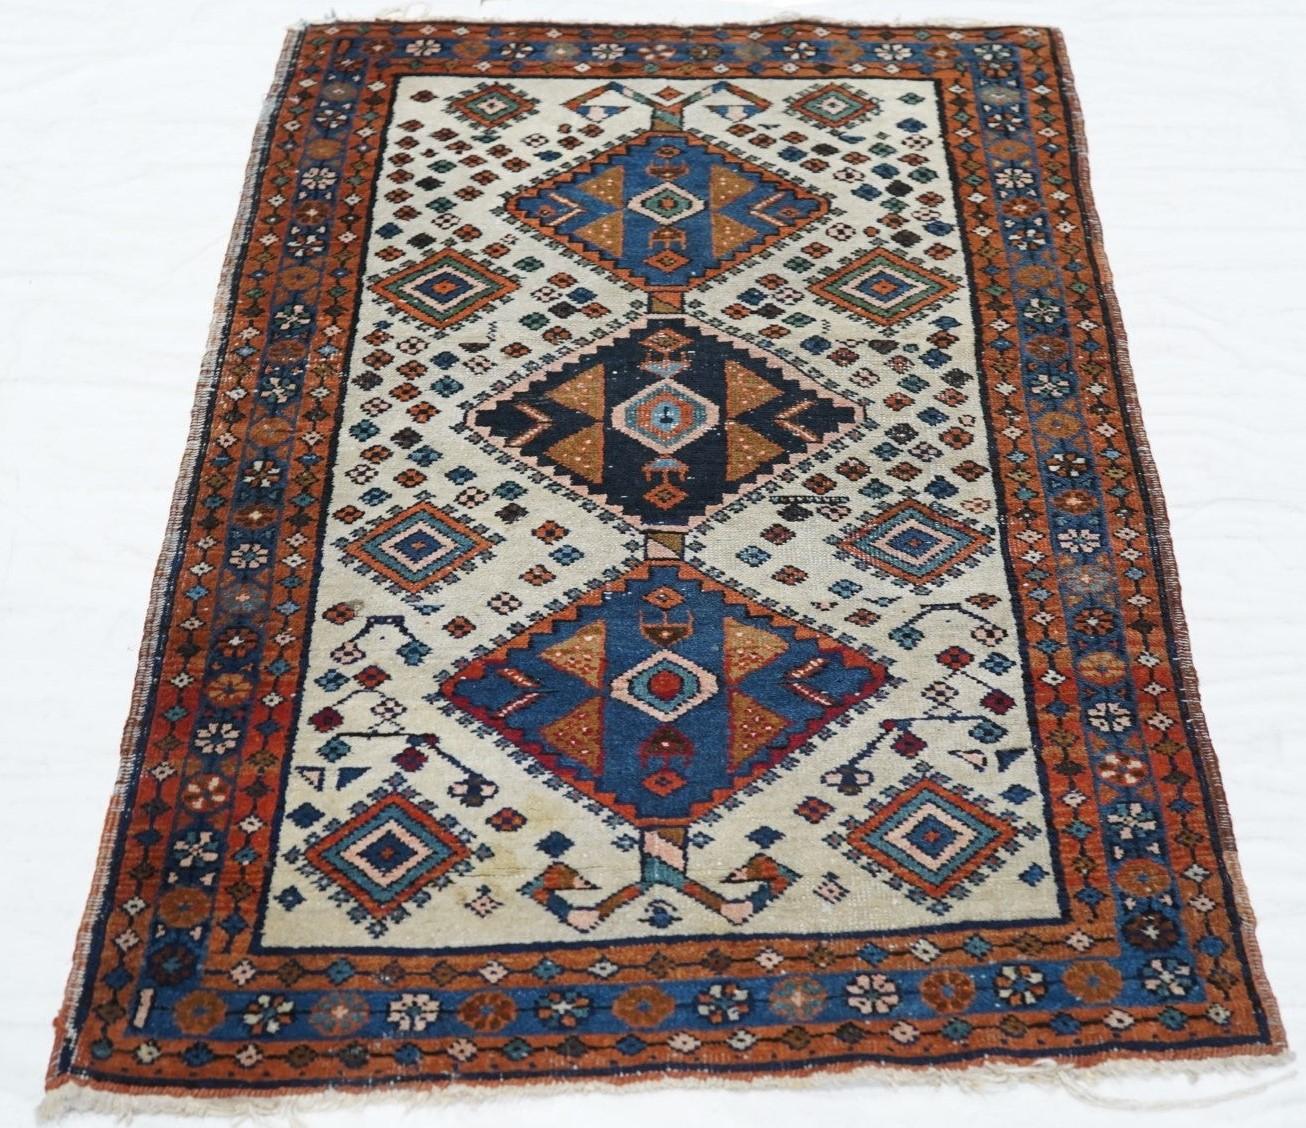 Vintage Persian Rug 2'6'' x 4'6''. The ecru field centres a pole medallion of three tab-fringed diamonds in medium blue and black, with red stylized leaf details. Smaller end suite nested diamonds and tertiary rosettes scattered about. Angular ram's